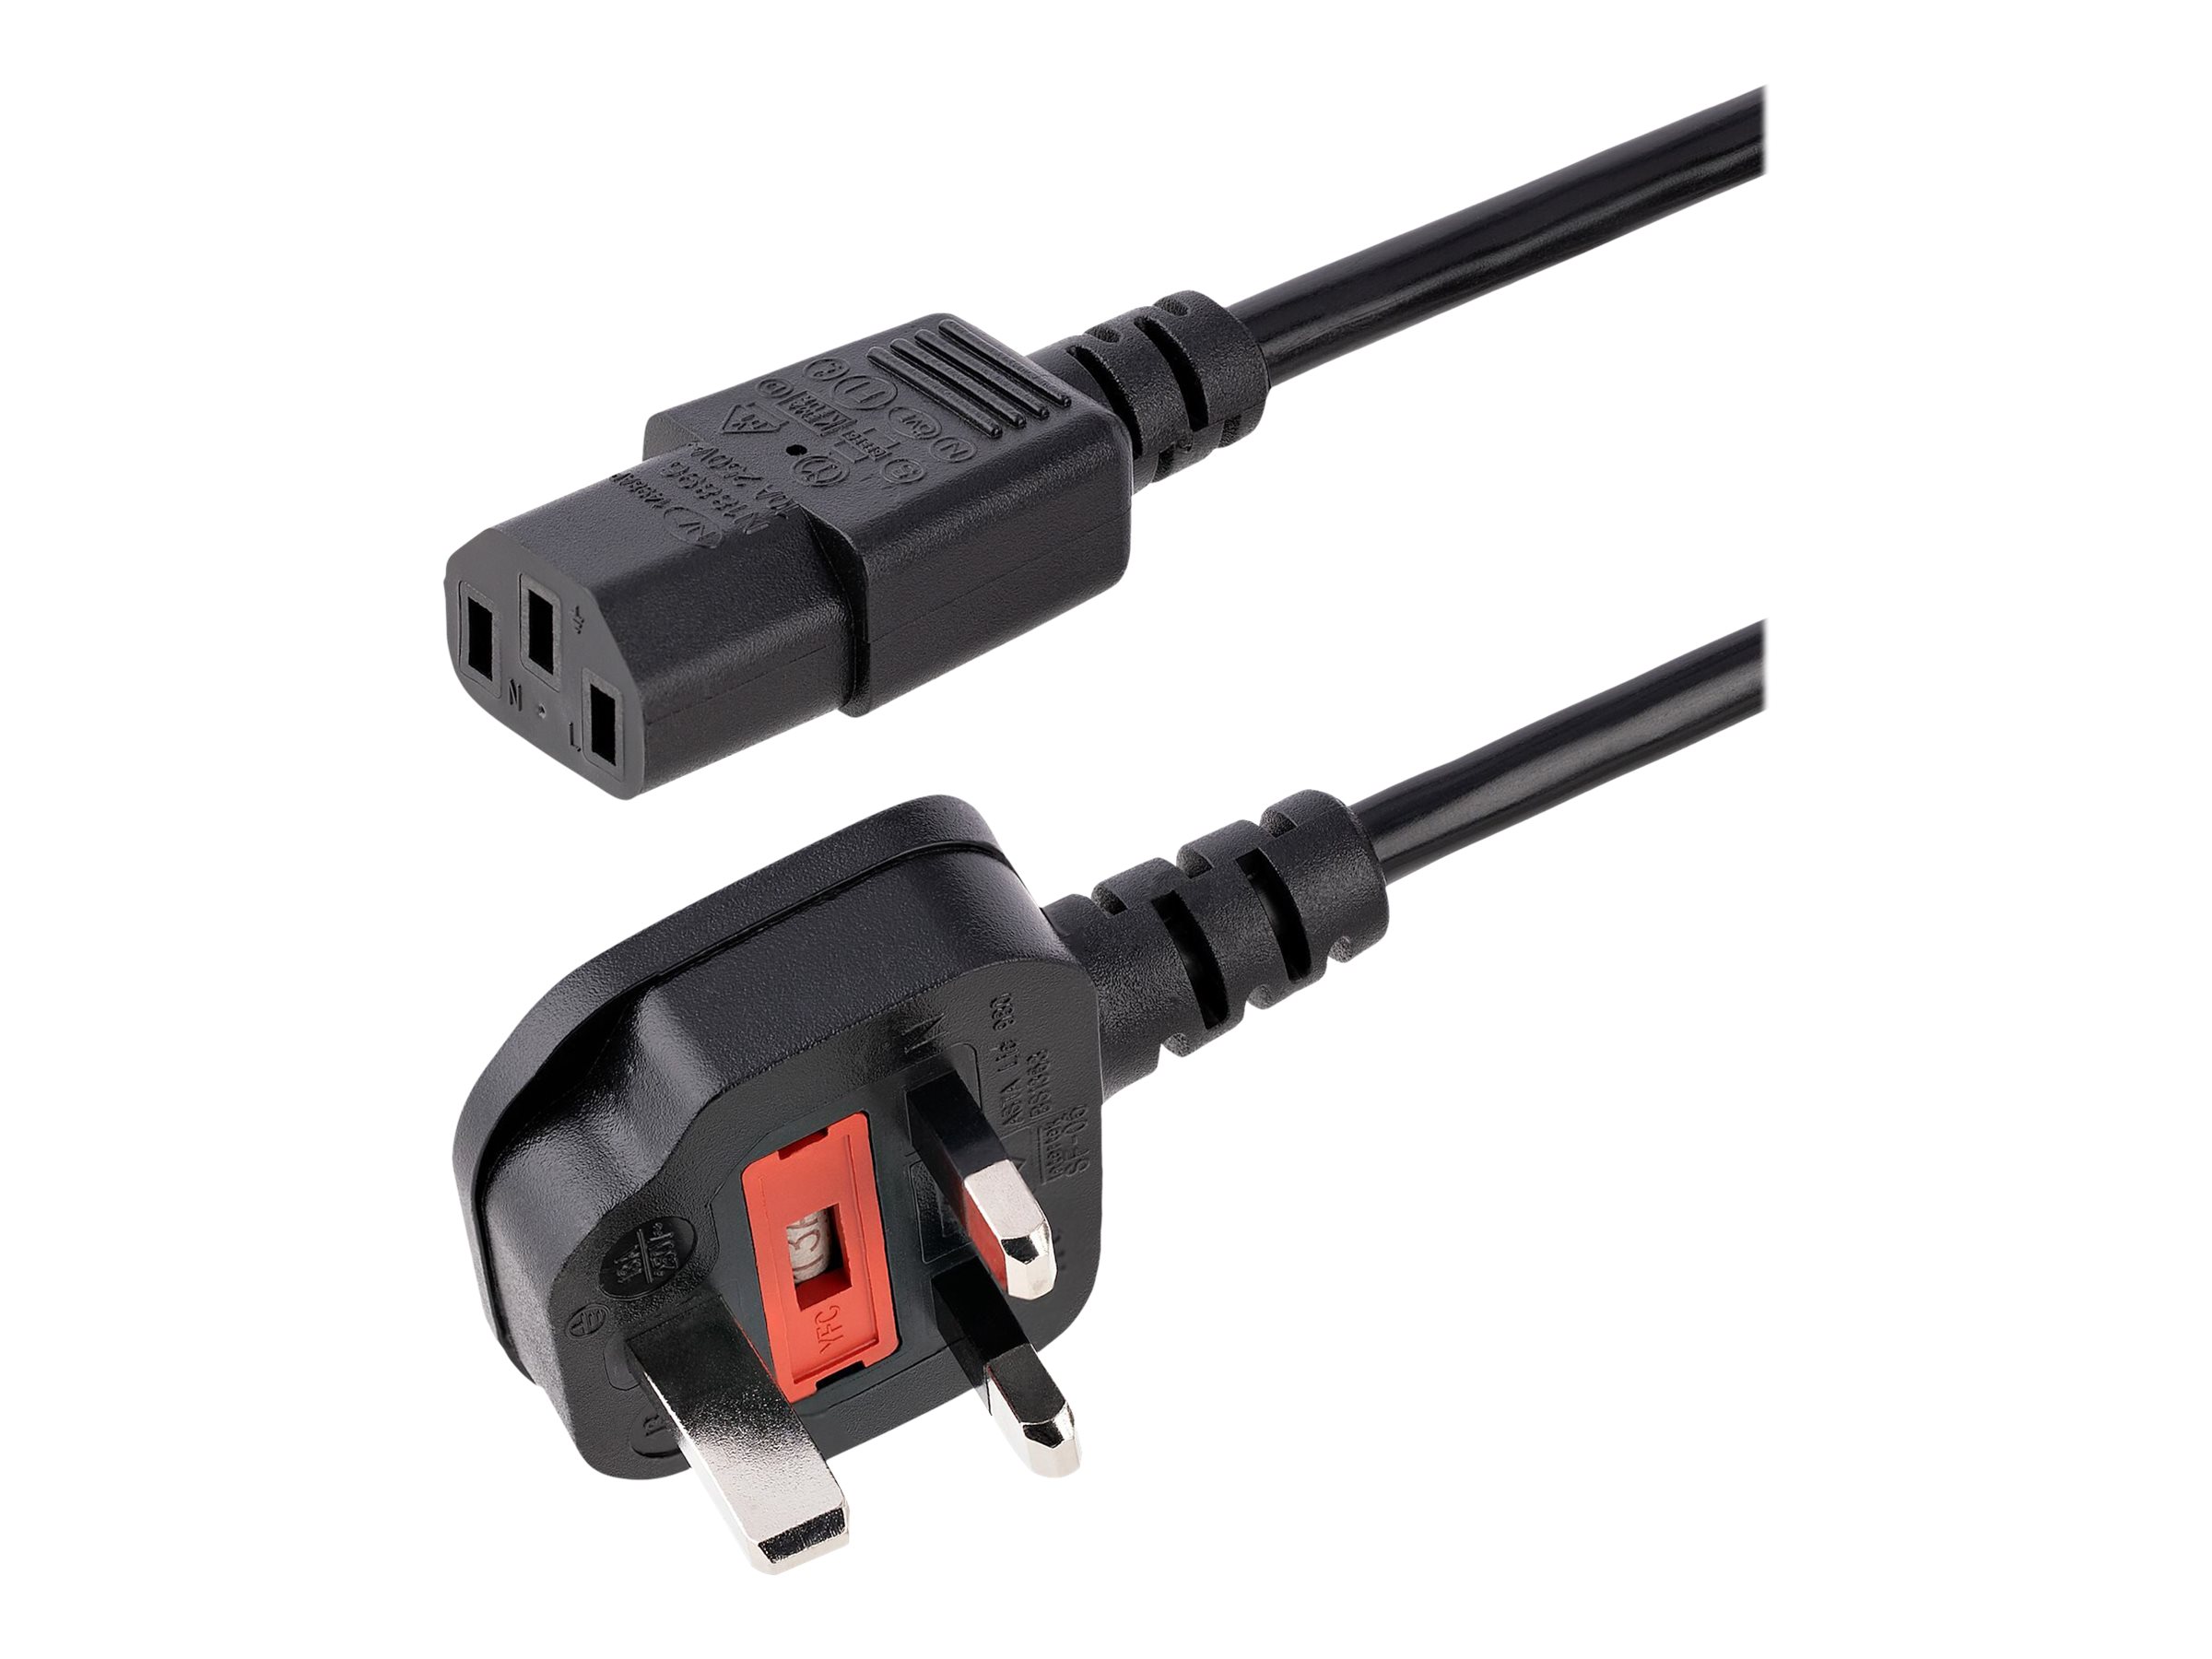 StarTech.com 3ft (1m) UK Computer Power Cable, BS 1363 to C13 Power Cord, 18AWG, 10A 250V, Black Replacement AC Power Cord, Monitor Power Cable, BS 1363 to IEC 60320 C13 Kettle Lead - PC Power Supply Cable (BS13U-1M-POWER-LEAD) - Câble d'alimentation - BS 1363 (P) pour power IEC 60320 C13 - CA 250 V - 10 A - 1 m - moulé - noir - BS13U-1M-POWER-LEAD - Câbles d'alimentation